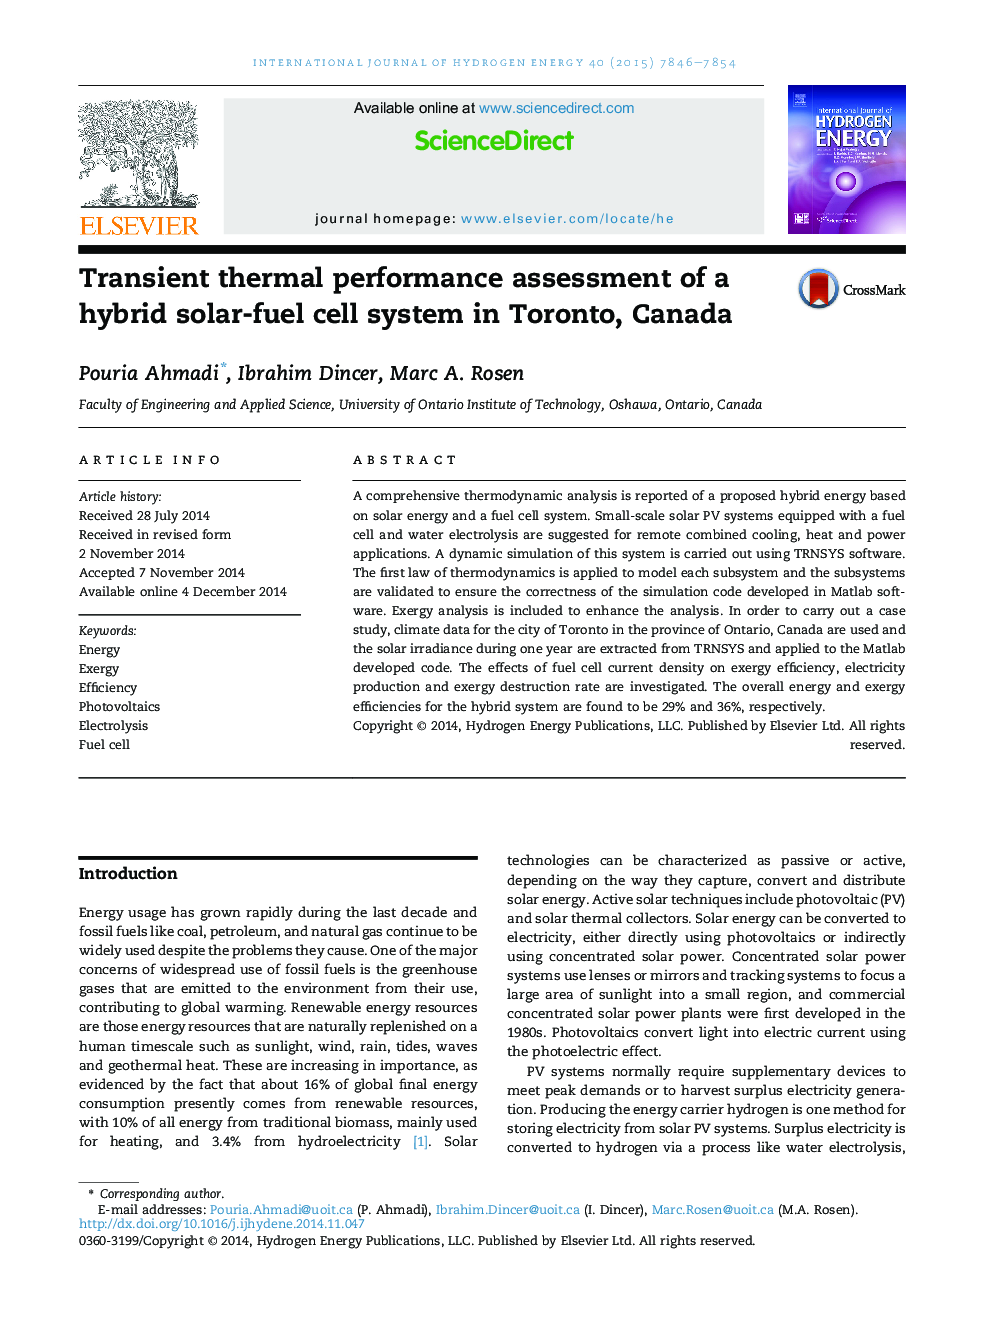 Transient thermal performance assessment of a hybrid solar-fuel cell system in Toronto, Canada